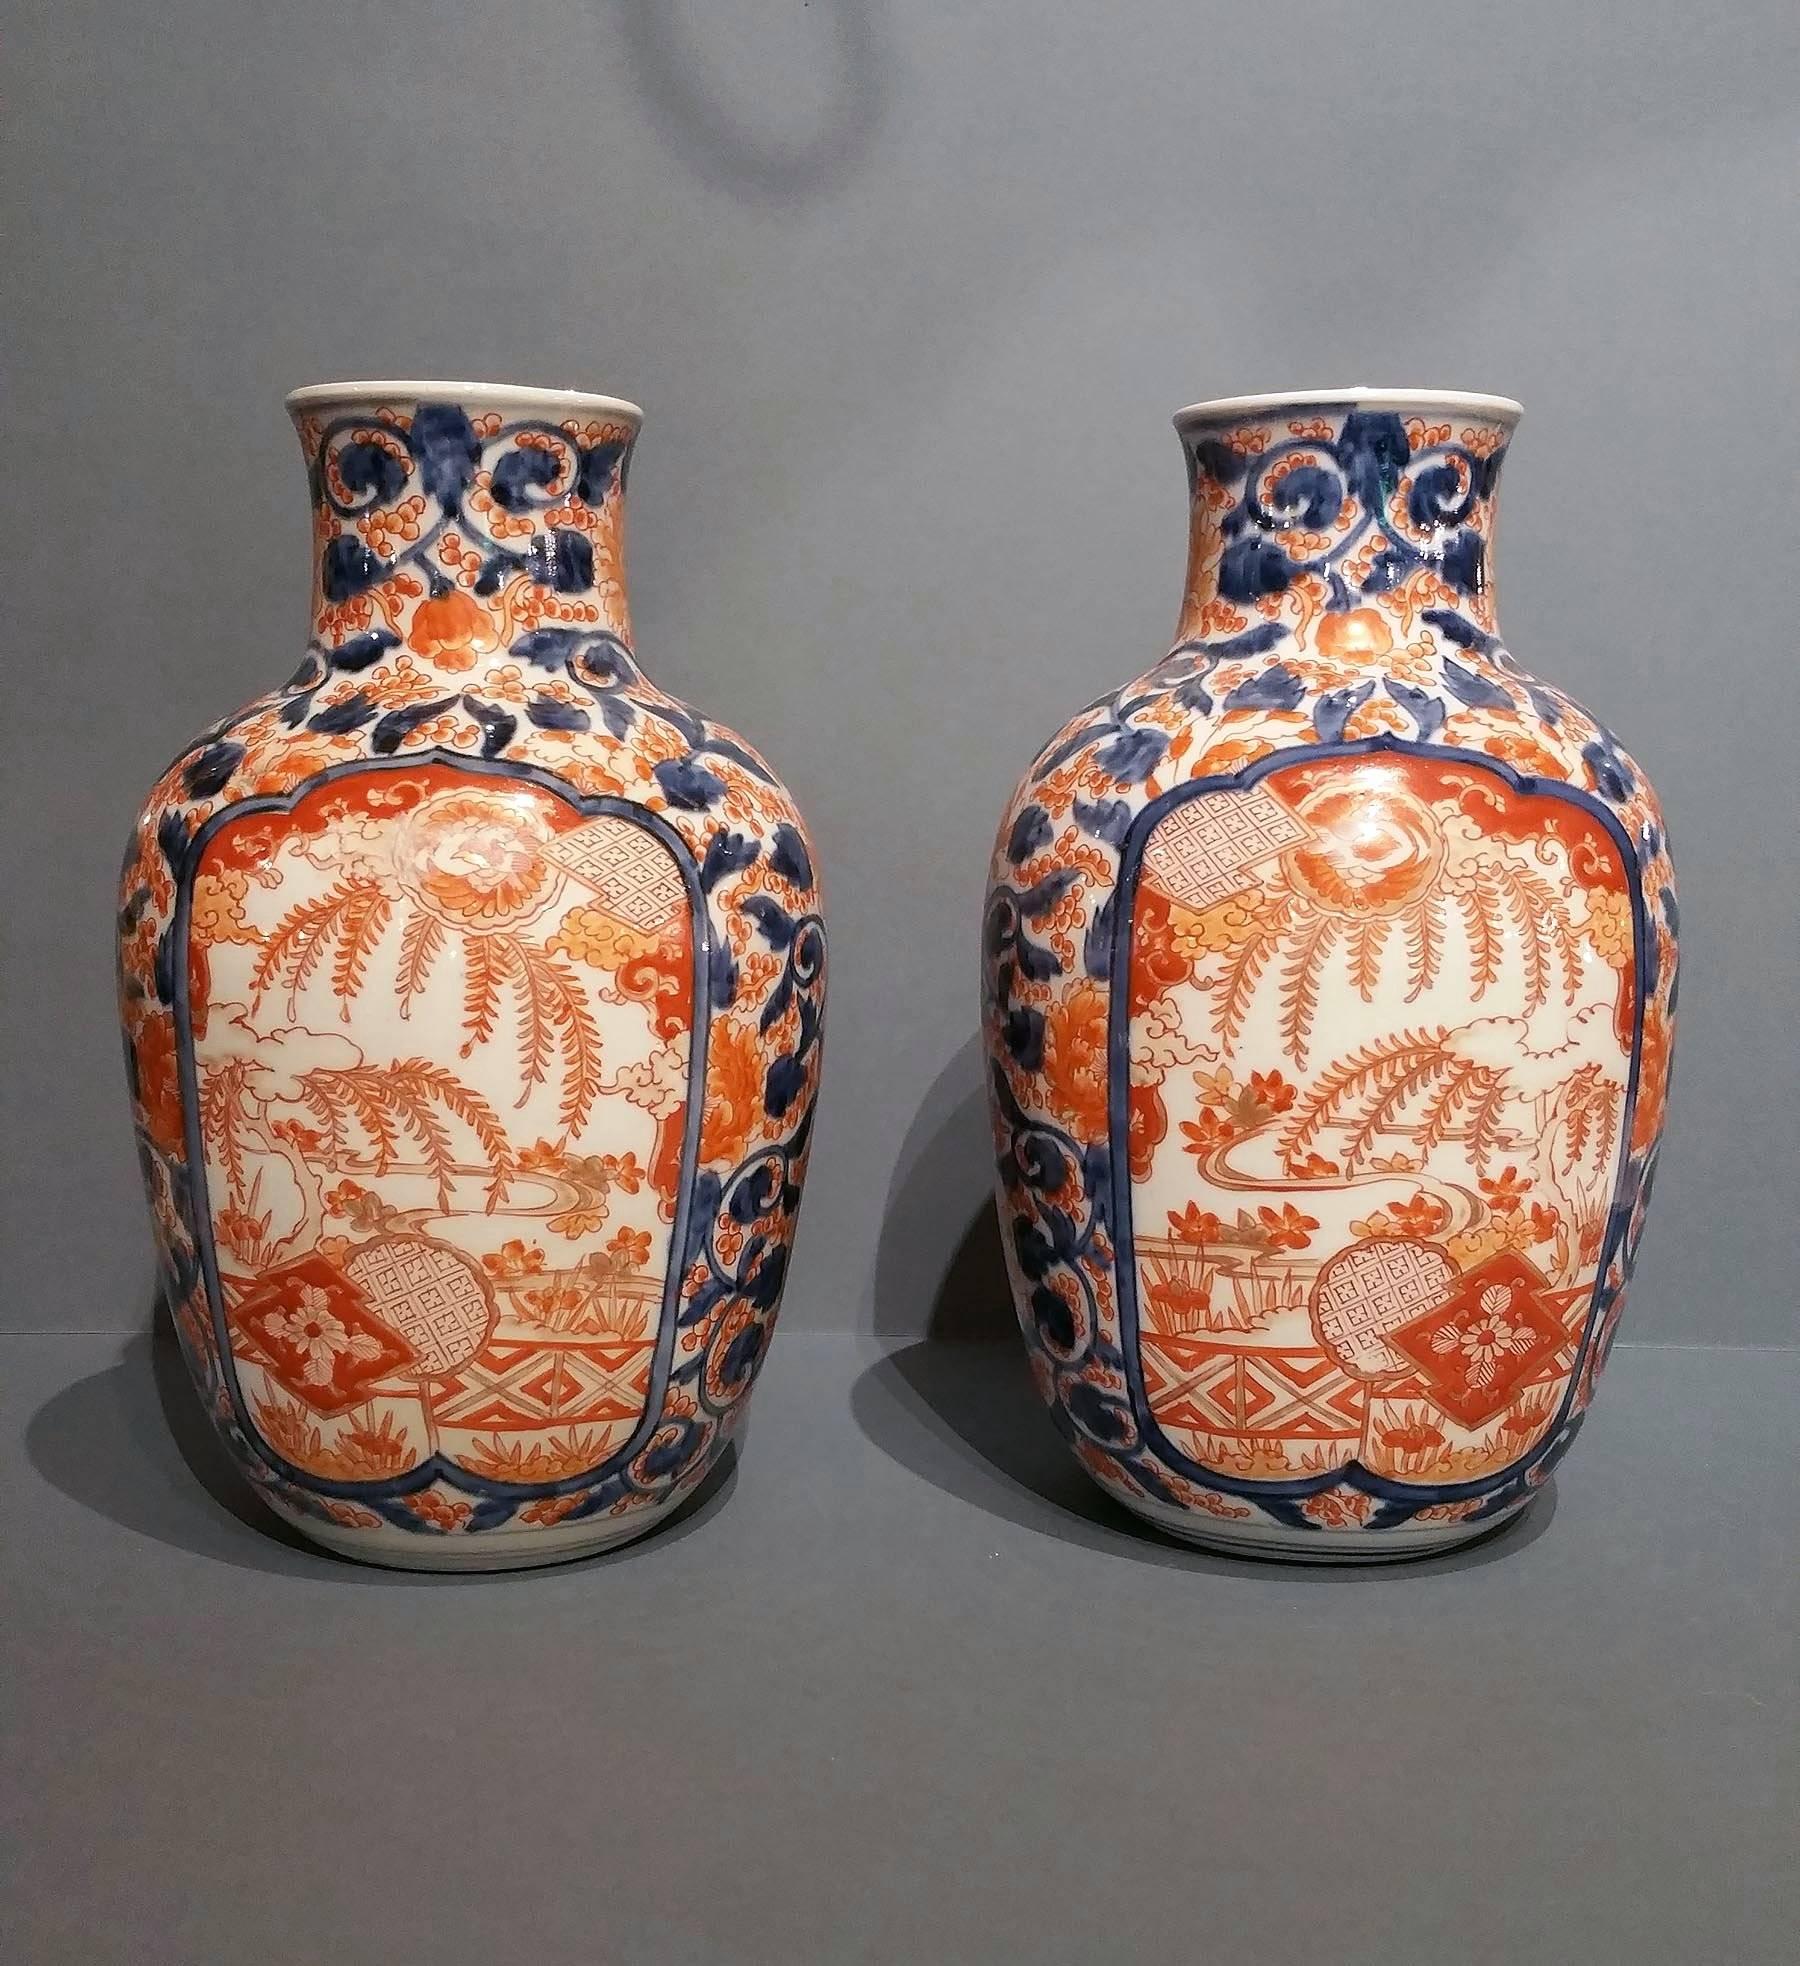 This lovely pair of 19th C. Imari Vases features a delicate elongated neck with a bright orange/red and dark cornflower blue profuse design of leaves and ferns. The vases measure 7 ½ in – 19 cm in diameter and 12 in – 30.5 cm in overall height.